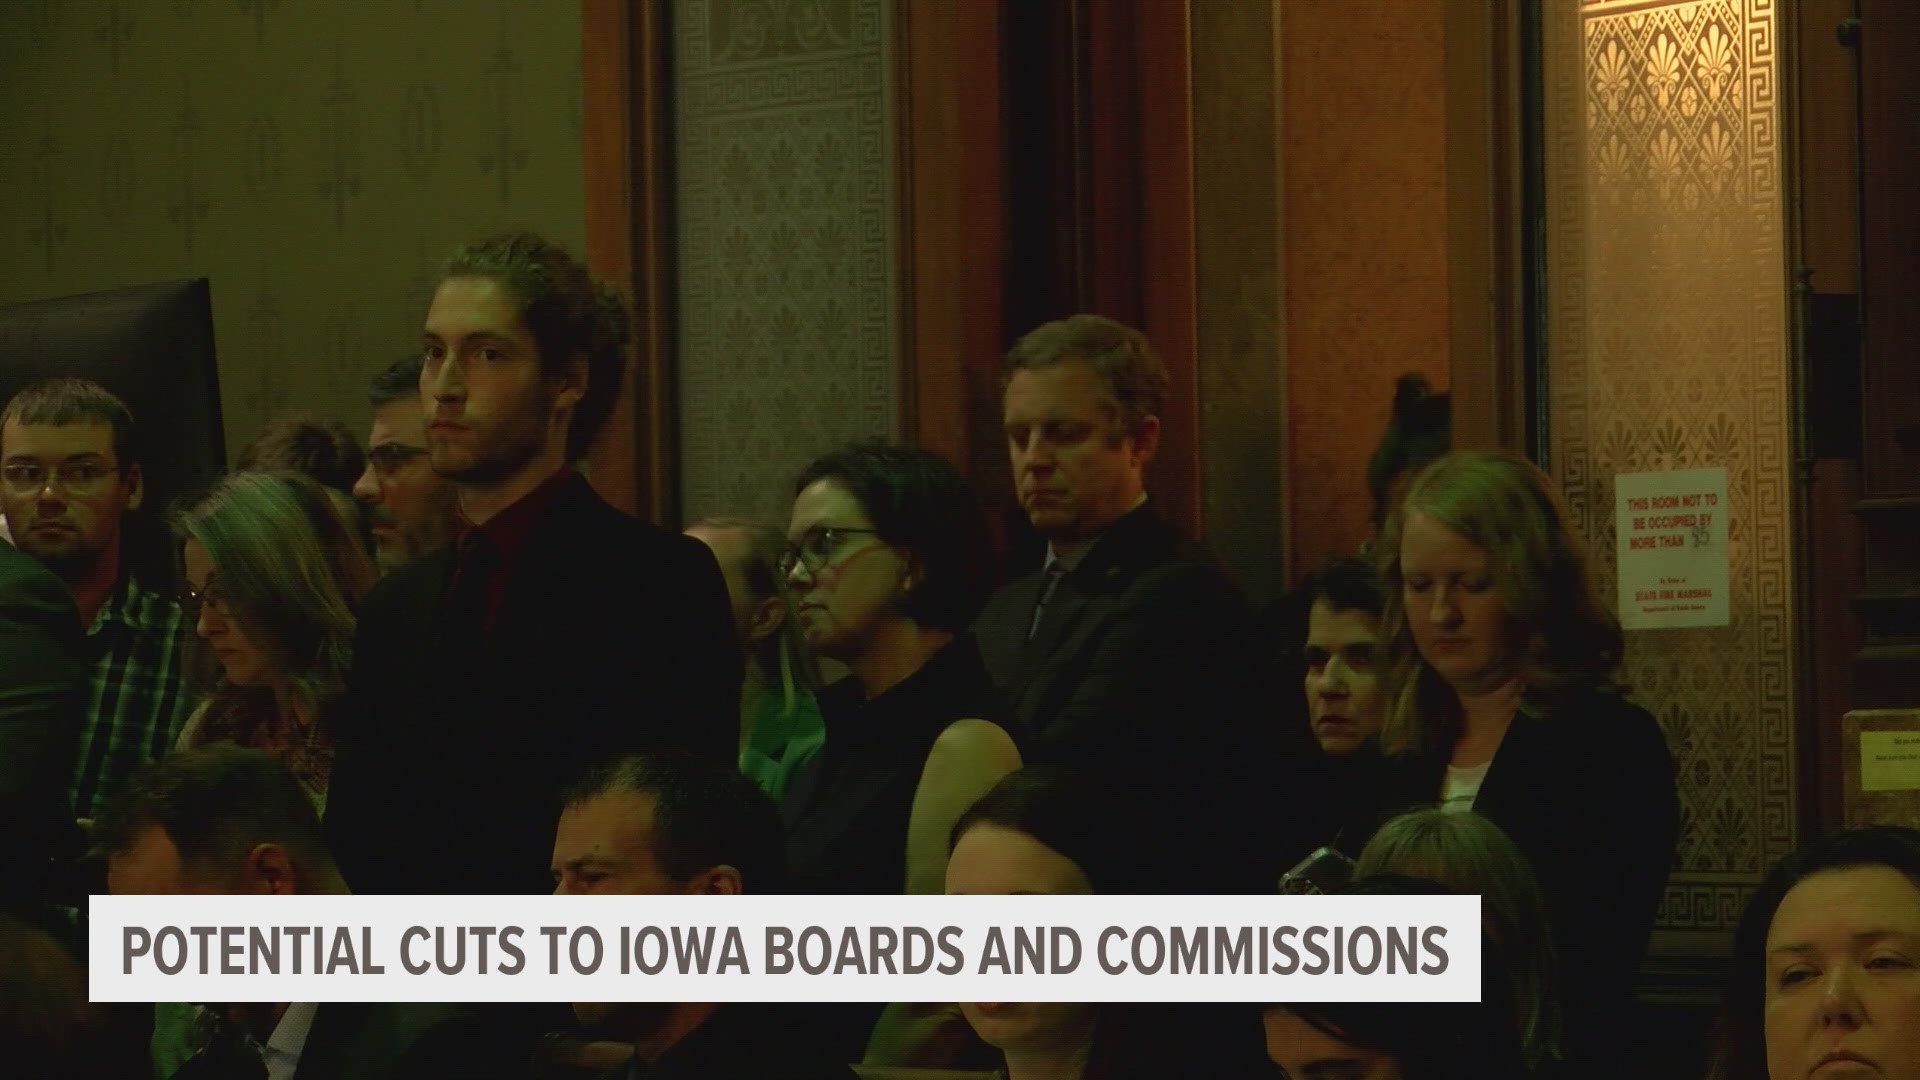 About 88 of Iowa's 256 boards and commissions would continue without change, while 69 would be eliminated.